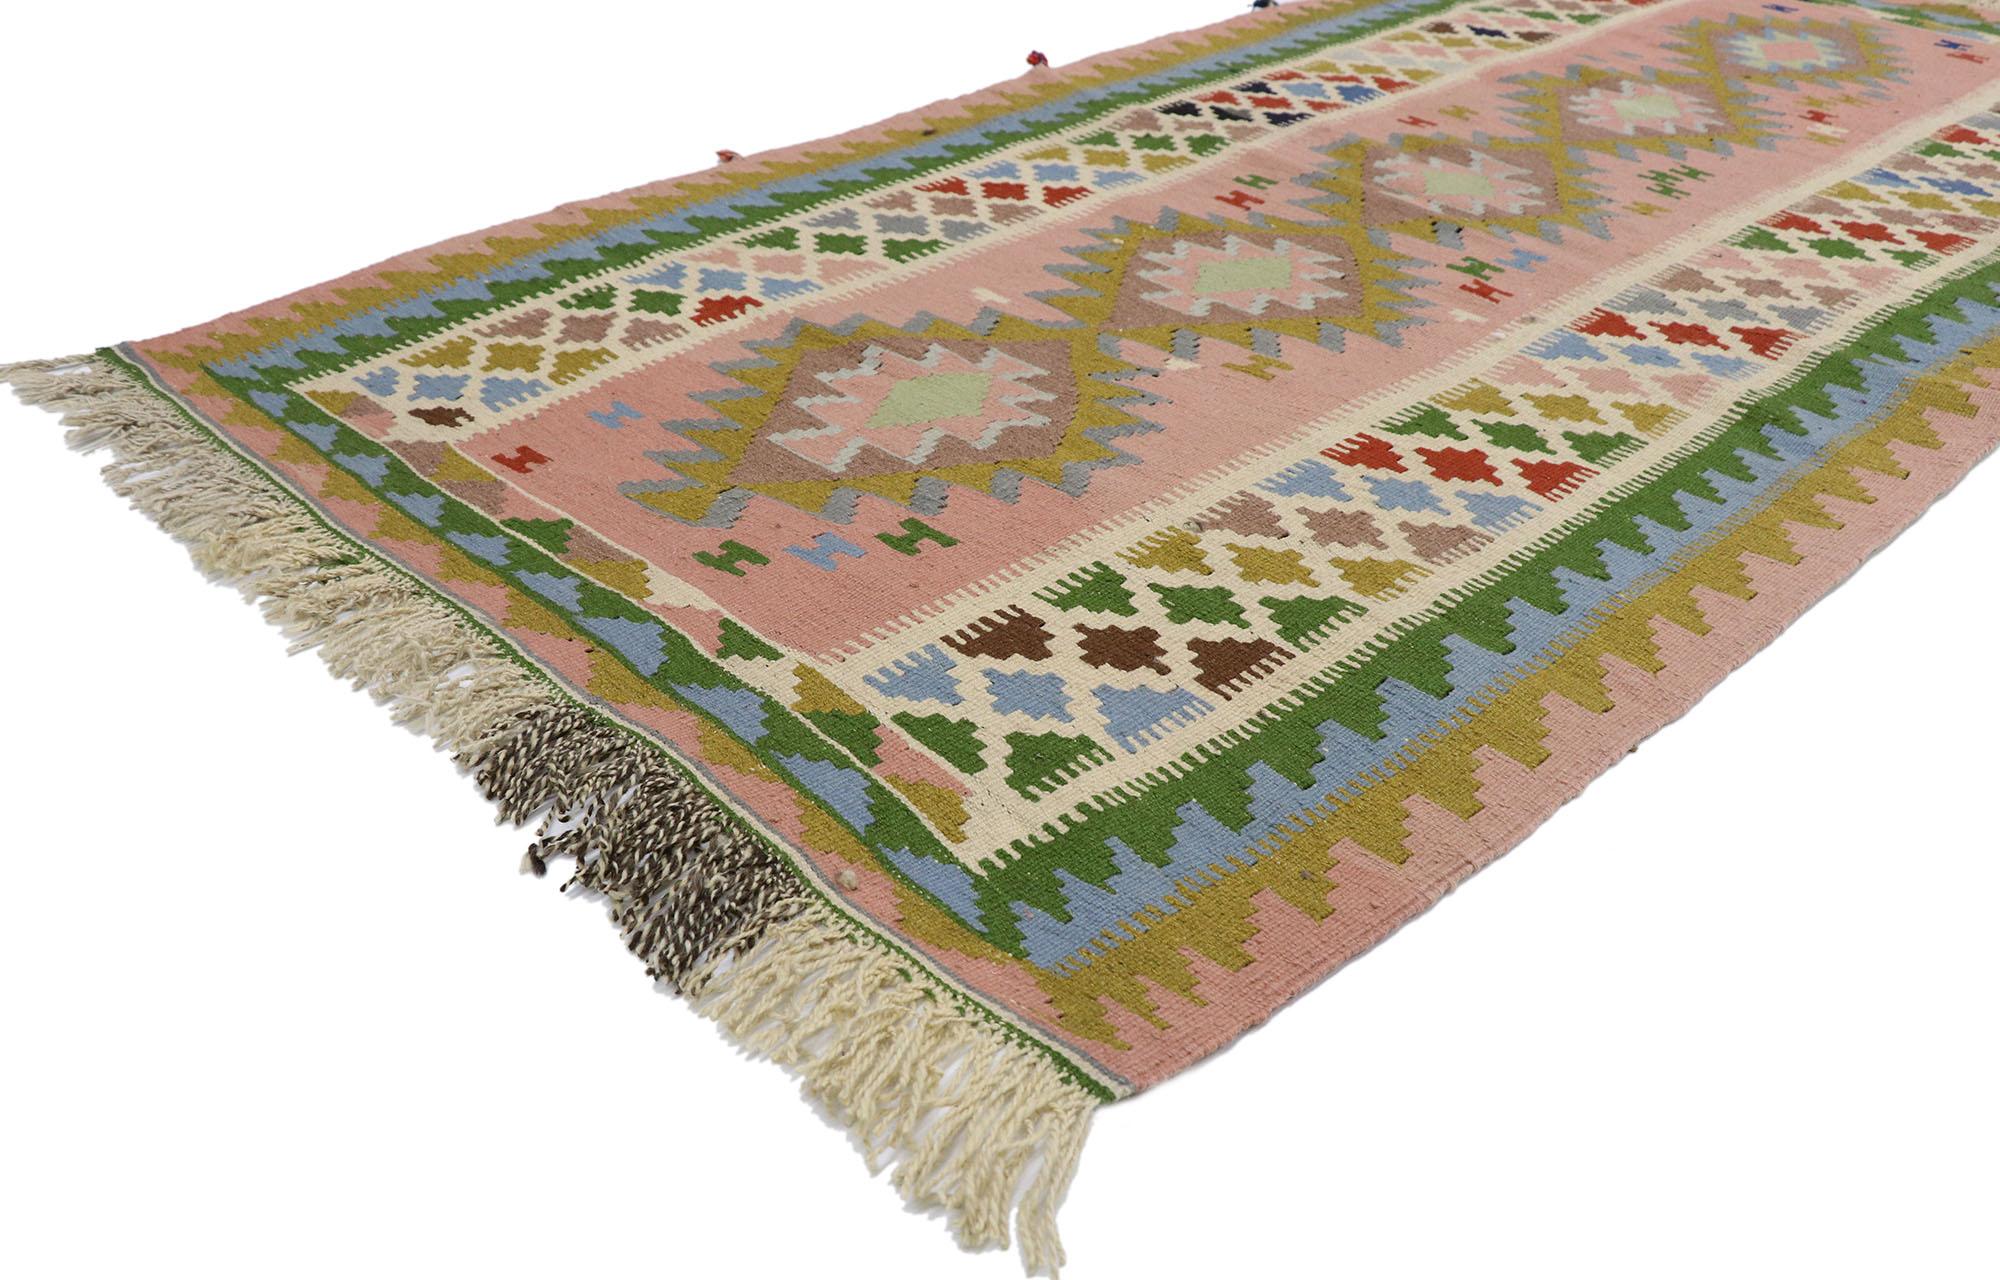 78024, vintage Persian Shiraz Kilim rug with boho chic Tribal style. Full of tiny details and a bold expressive design combined with vibrant colors and tribal style, this hand-woven wool vintage Persian Shiraz kilim rug is a captivating vision of